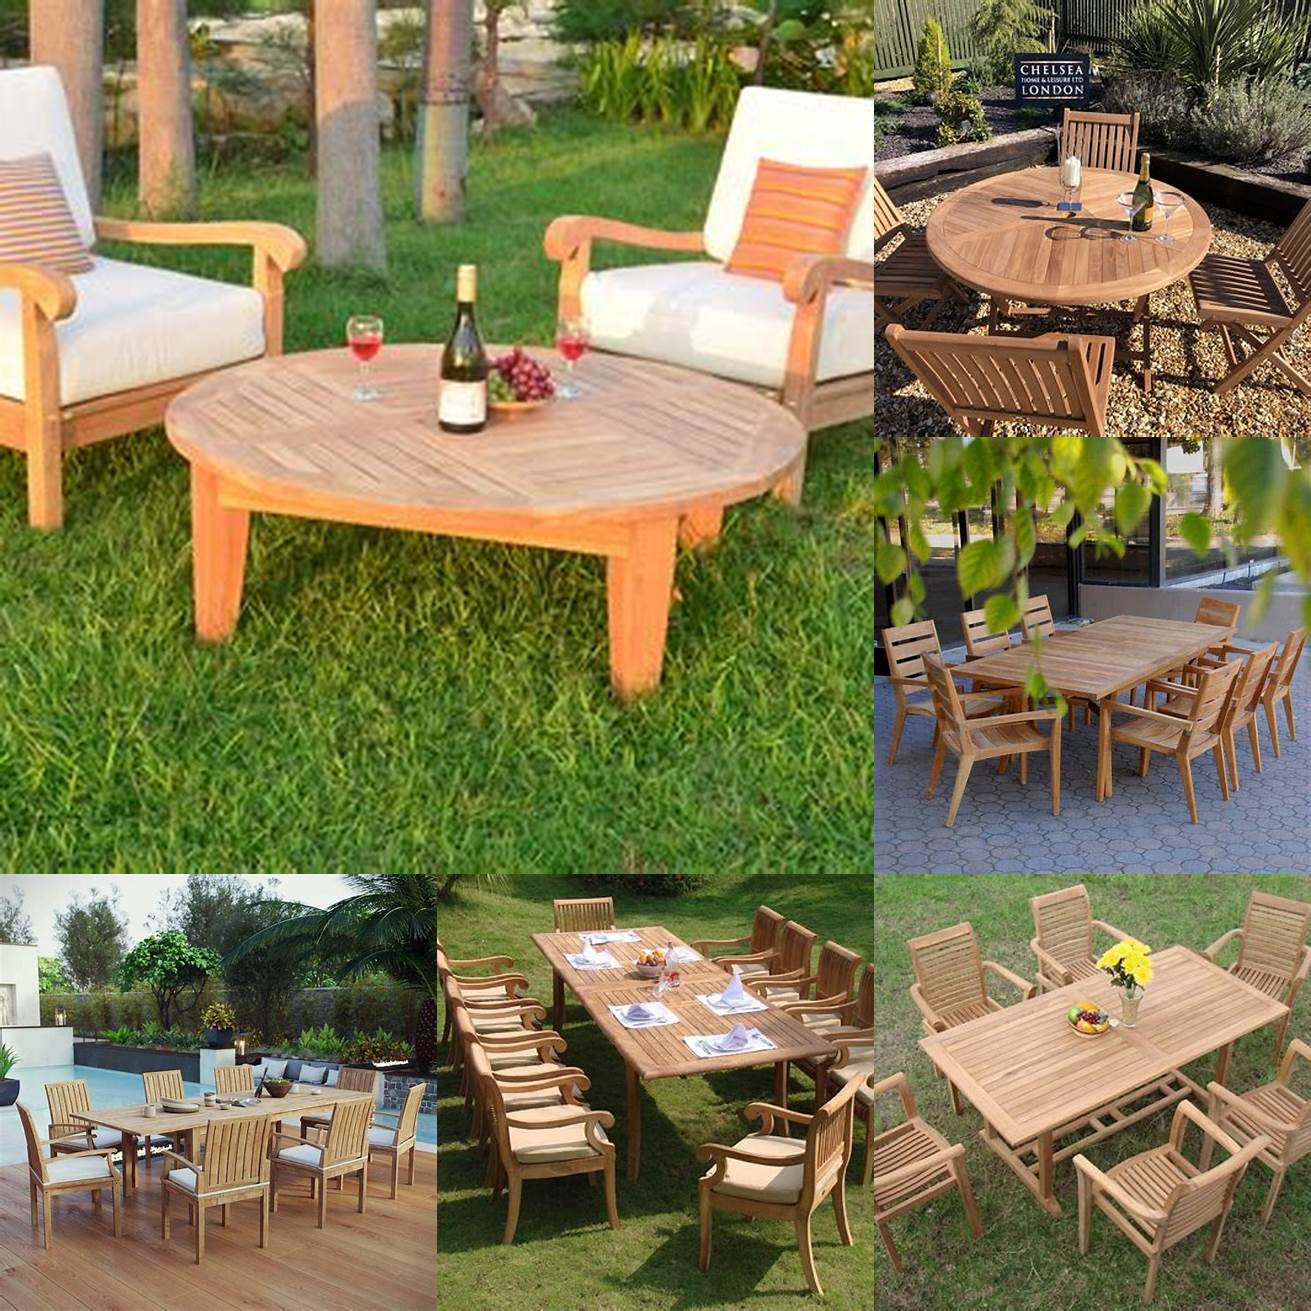 A teak outdoor furniture store owner